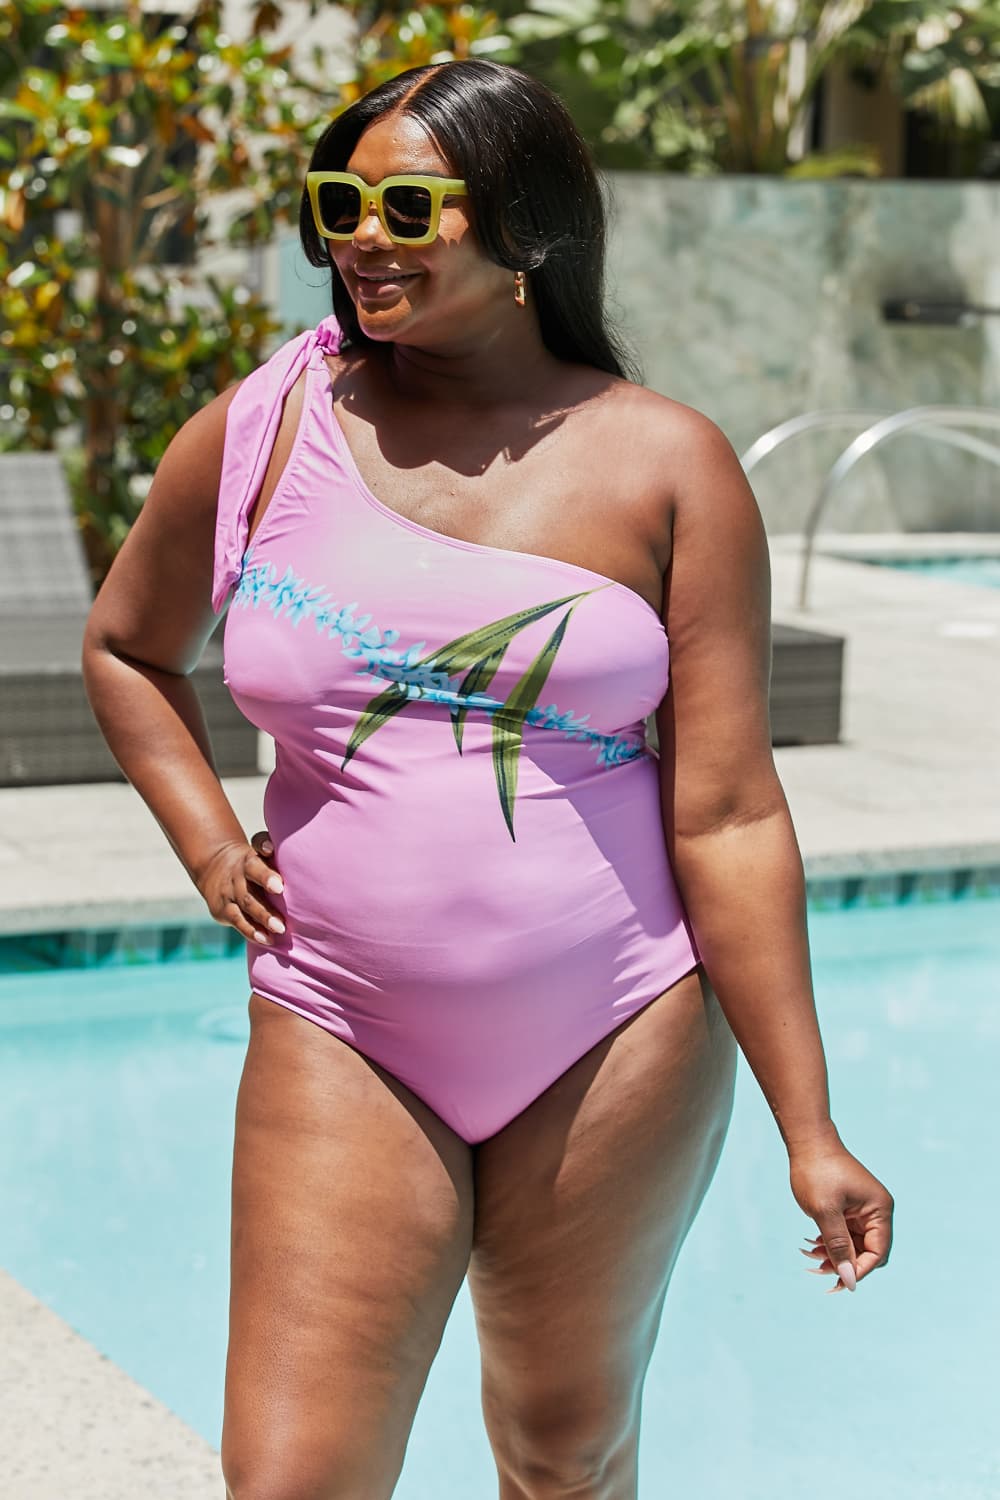 Marina West Swim Vacay Mode One Shoulder Swimsuit in Carnation Pink Mother Daughter Swimwear  Sunset and Swim   